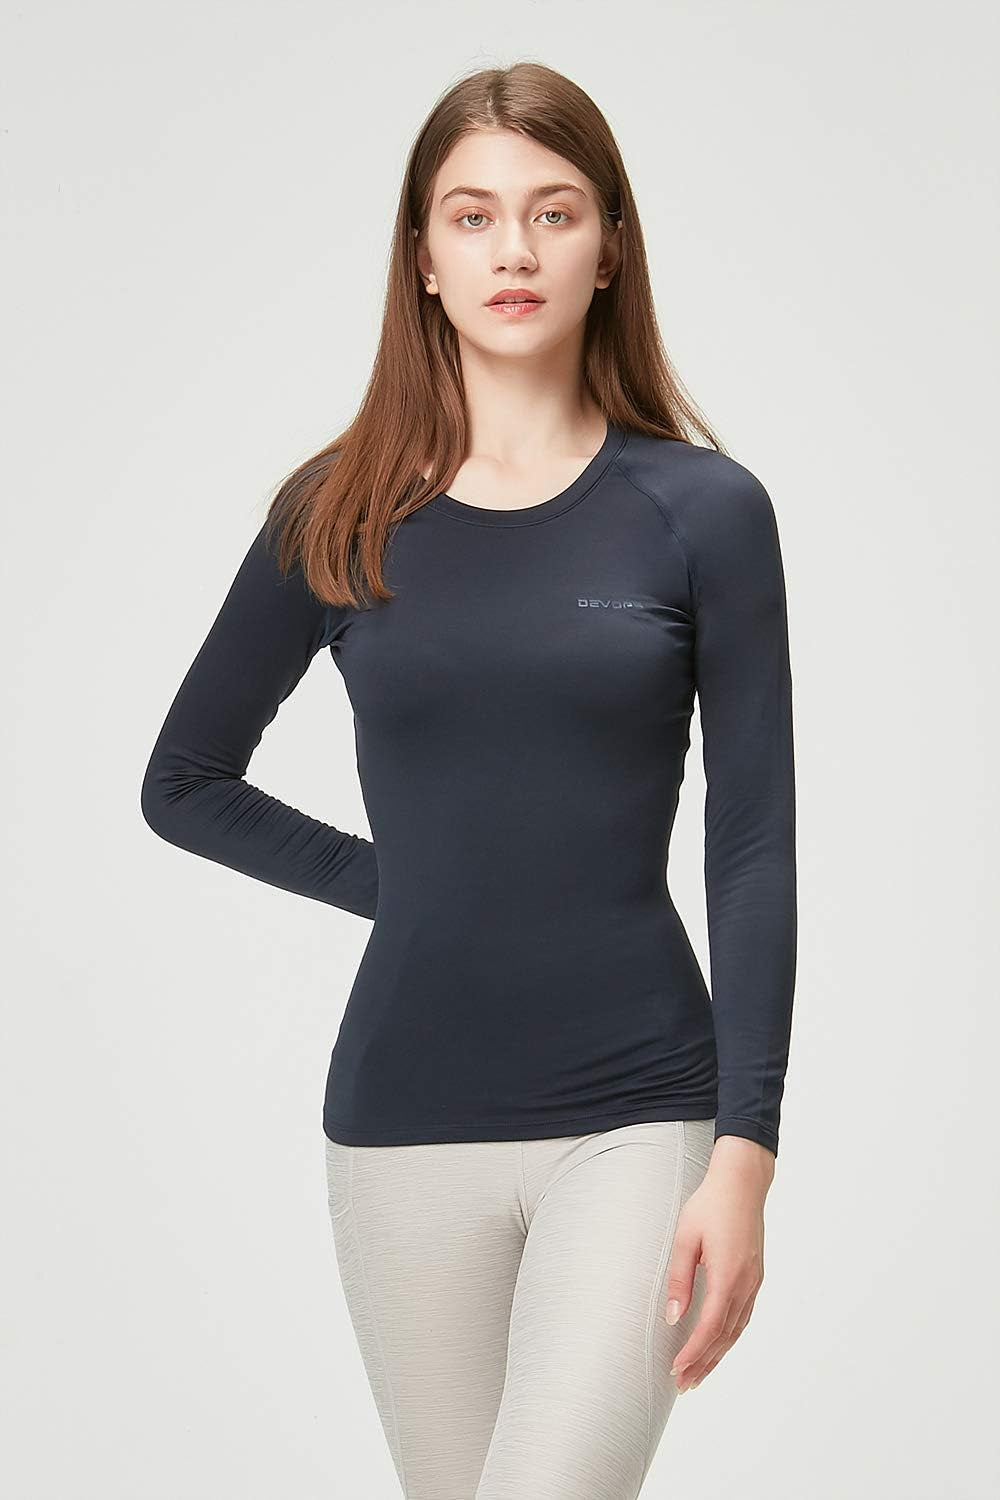 Women'S 2 Pack Thermal Long Sleeve Shirts Compression Baselayer Tops